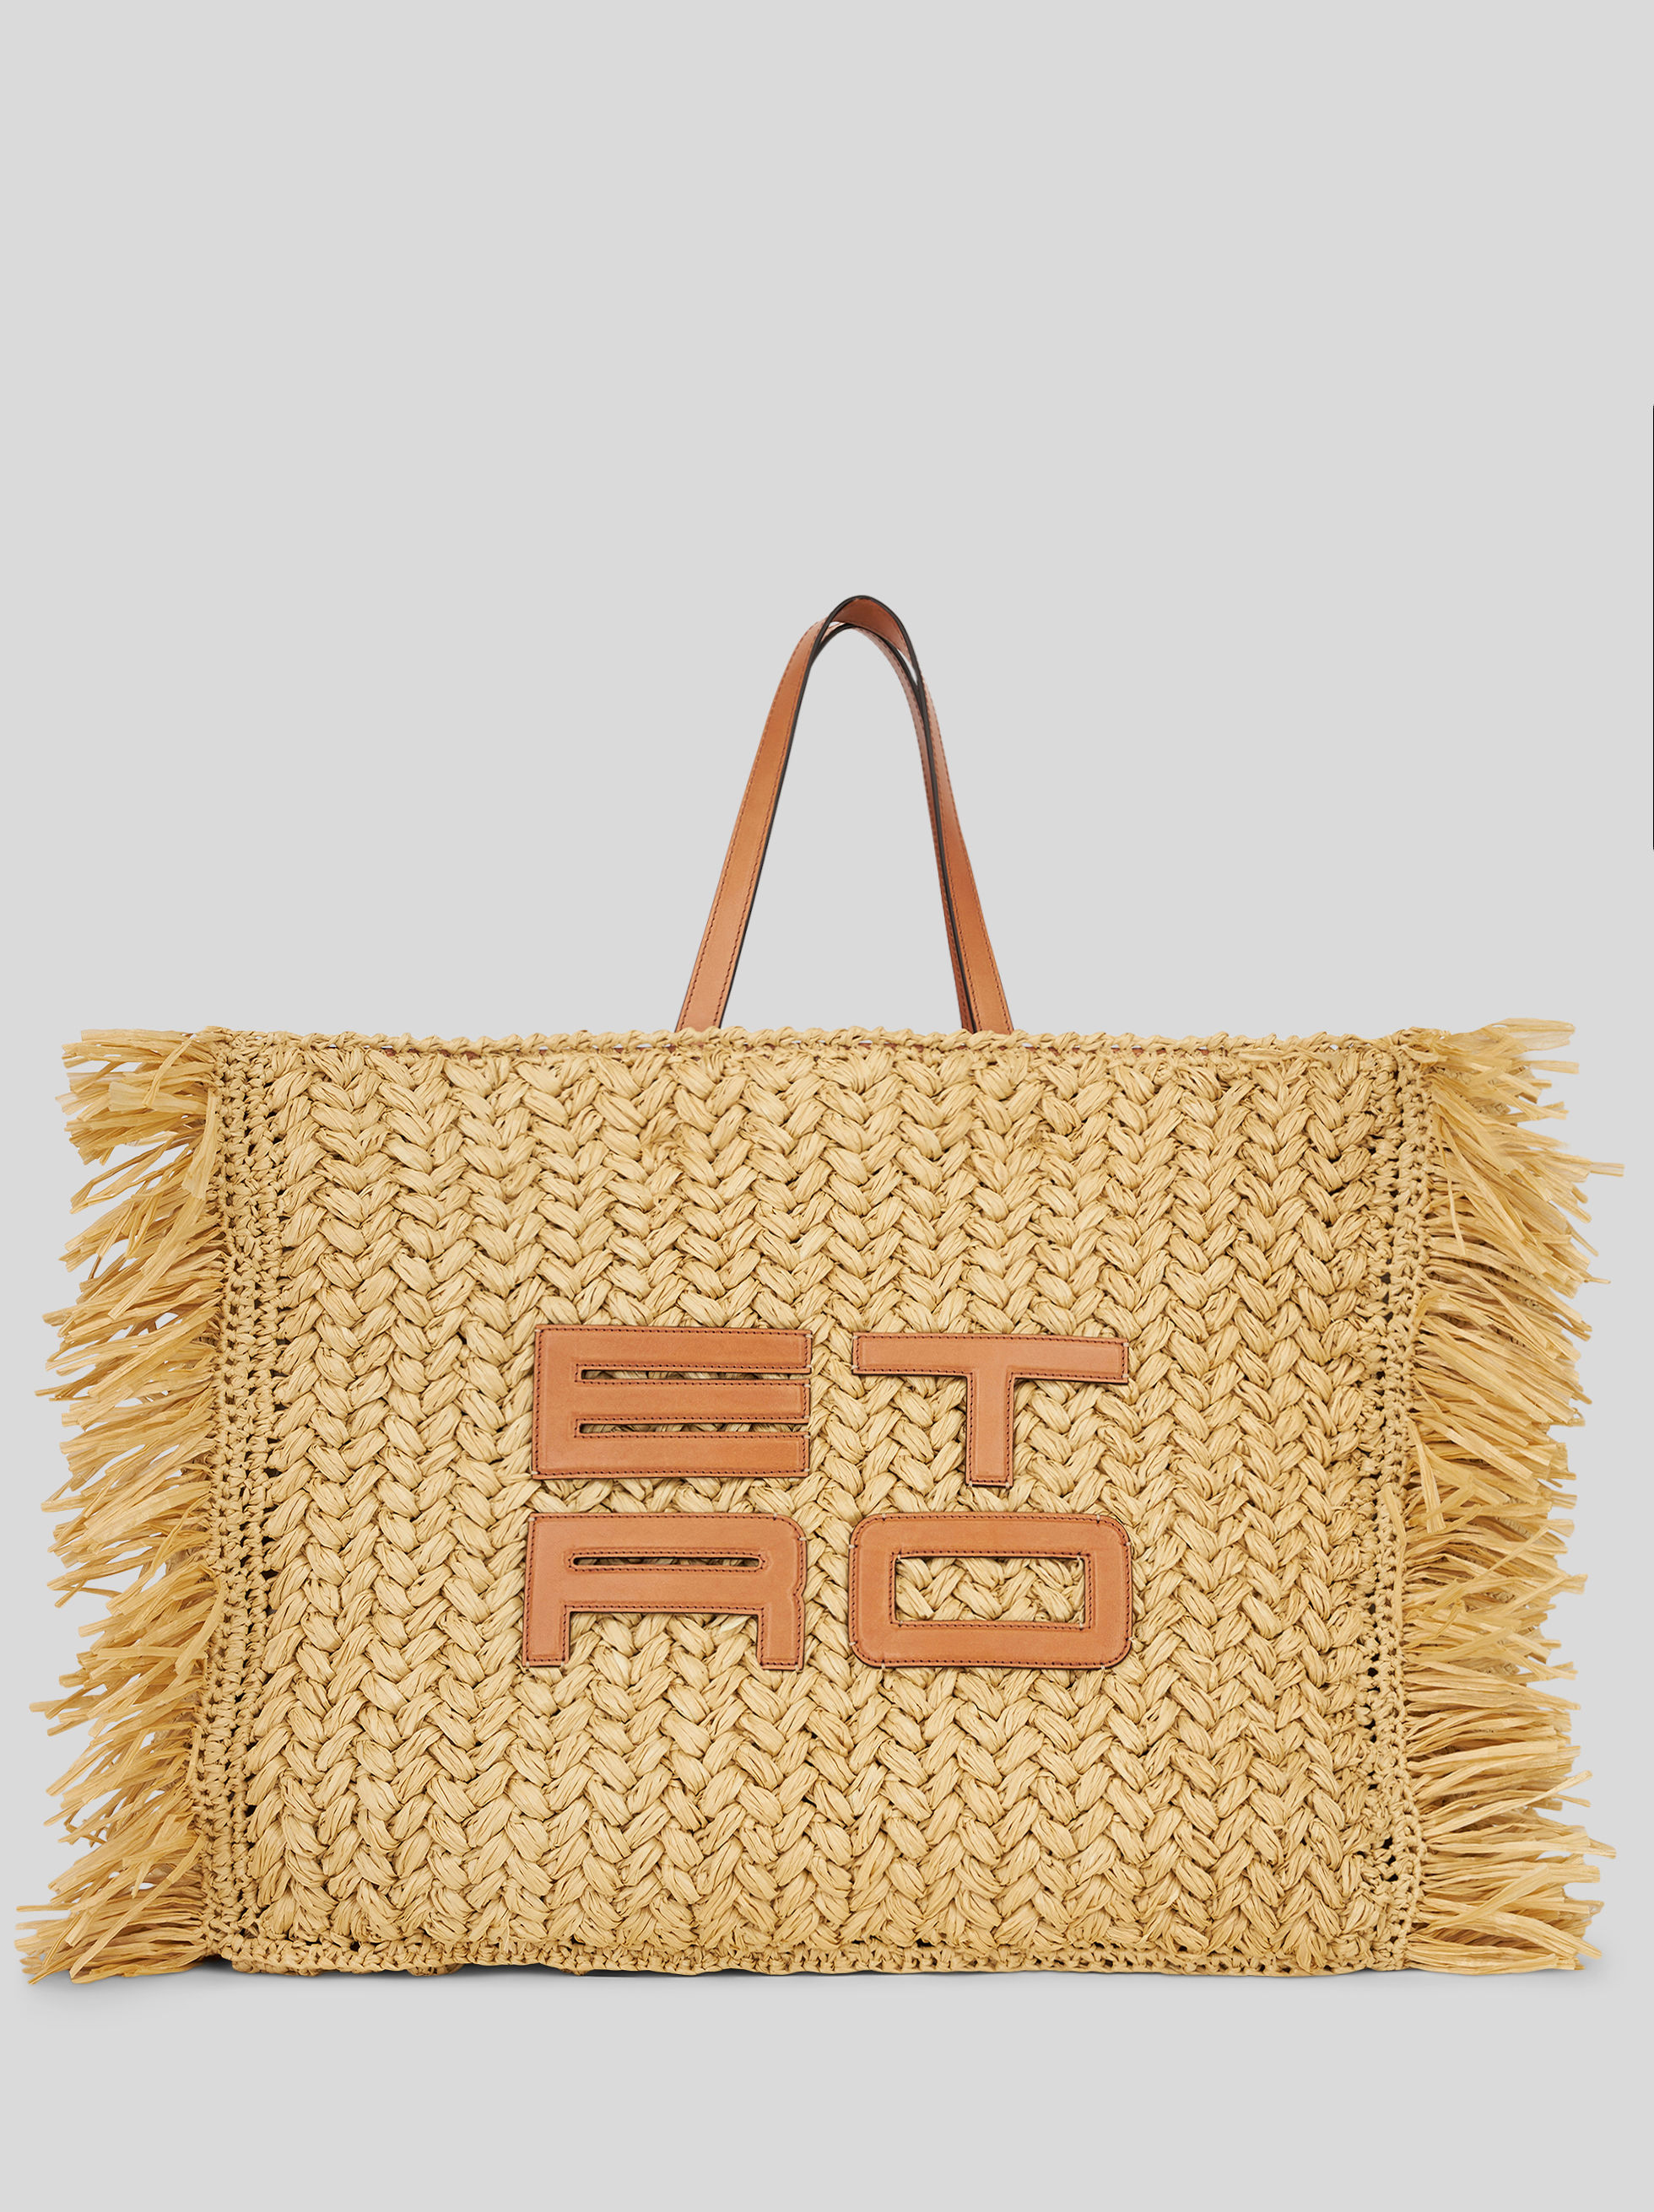 LARGE SHOPPING BAG IN PERFORATED RAFFIA WITH ETRO CUBE LOGO